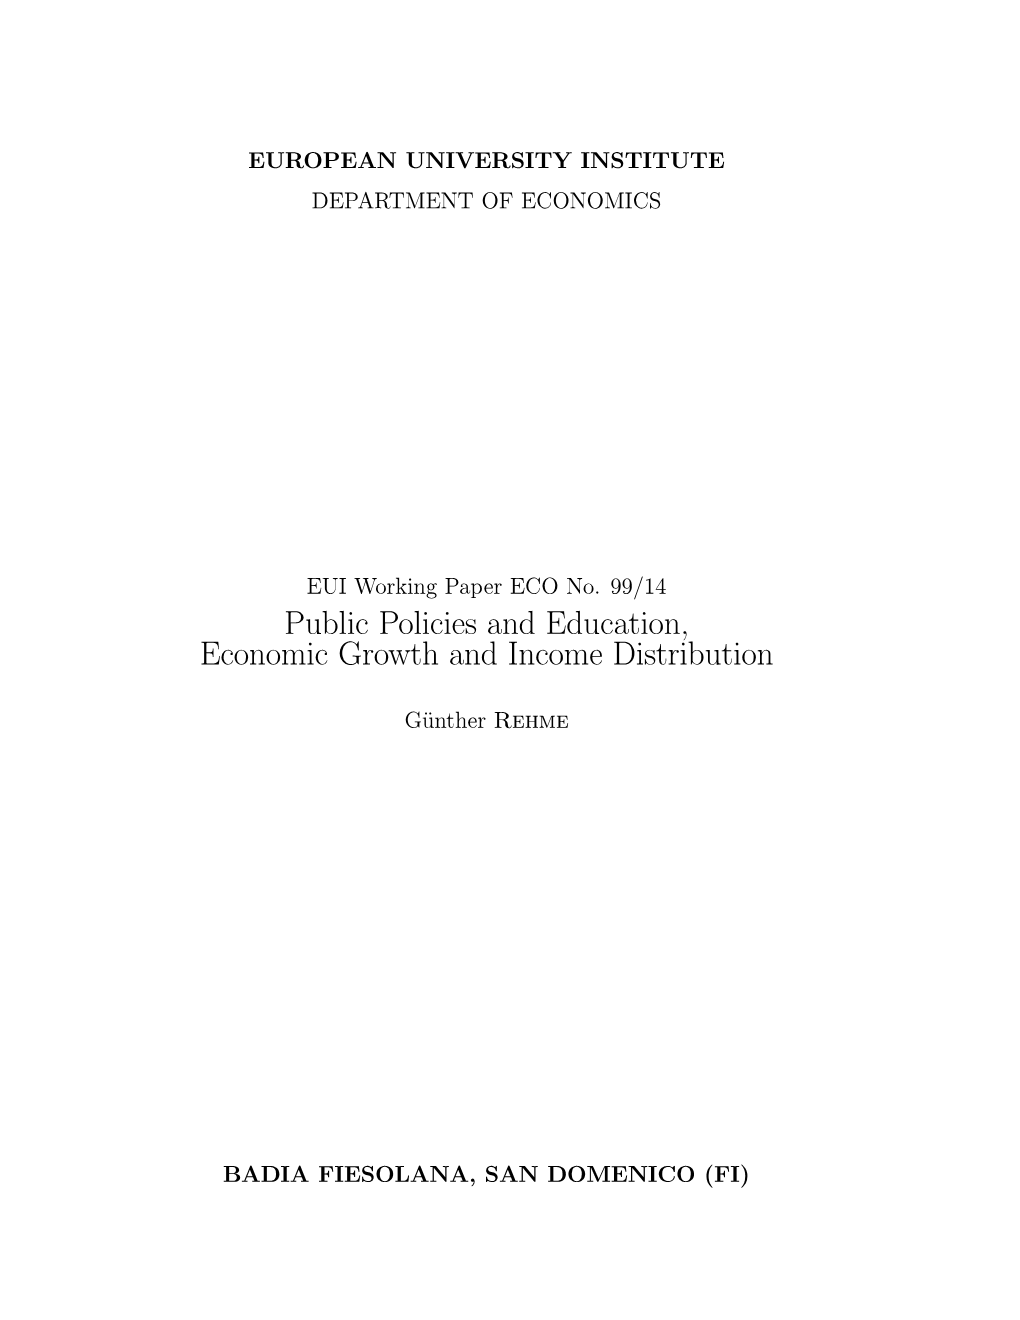 Public Policies and Education, Economic Browth and Income Distribution